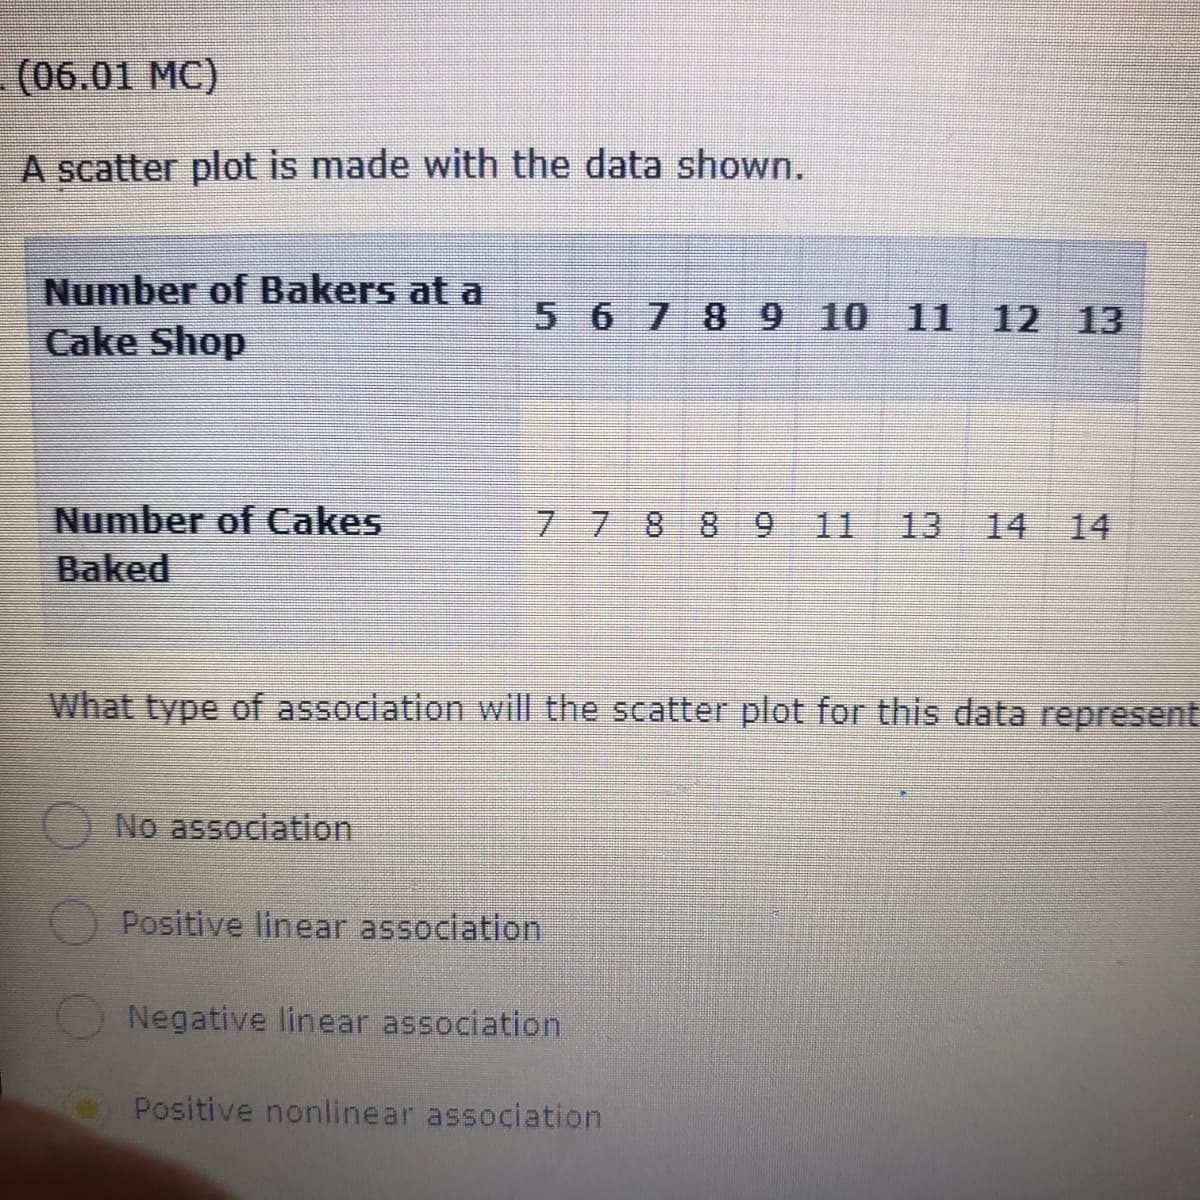 - (06.01 MC)
A scatter plot is made with the data shown.
Number of Bakers at a
5678 9 10 11 12 13
Cake Shop
Number of Cakes
Baked
7 7 8 8 9 11
13
14 14
What type of association will the scatter plot for this data represent
No association
Positive linear association
Negative linear association
Positive nonlinear association
